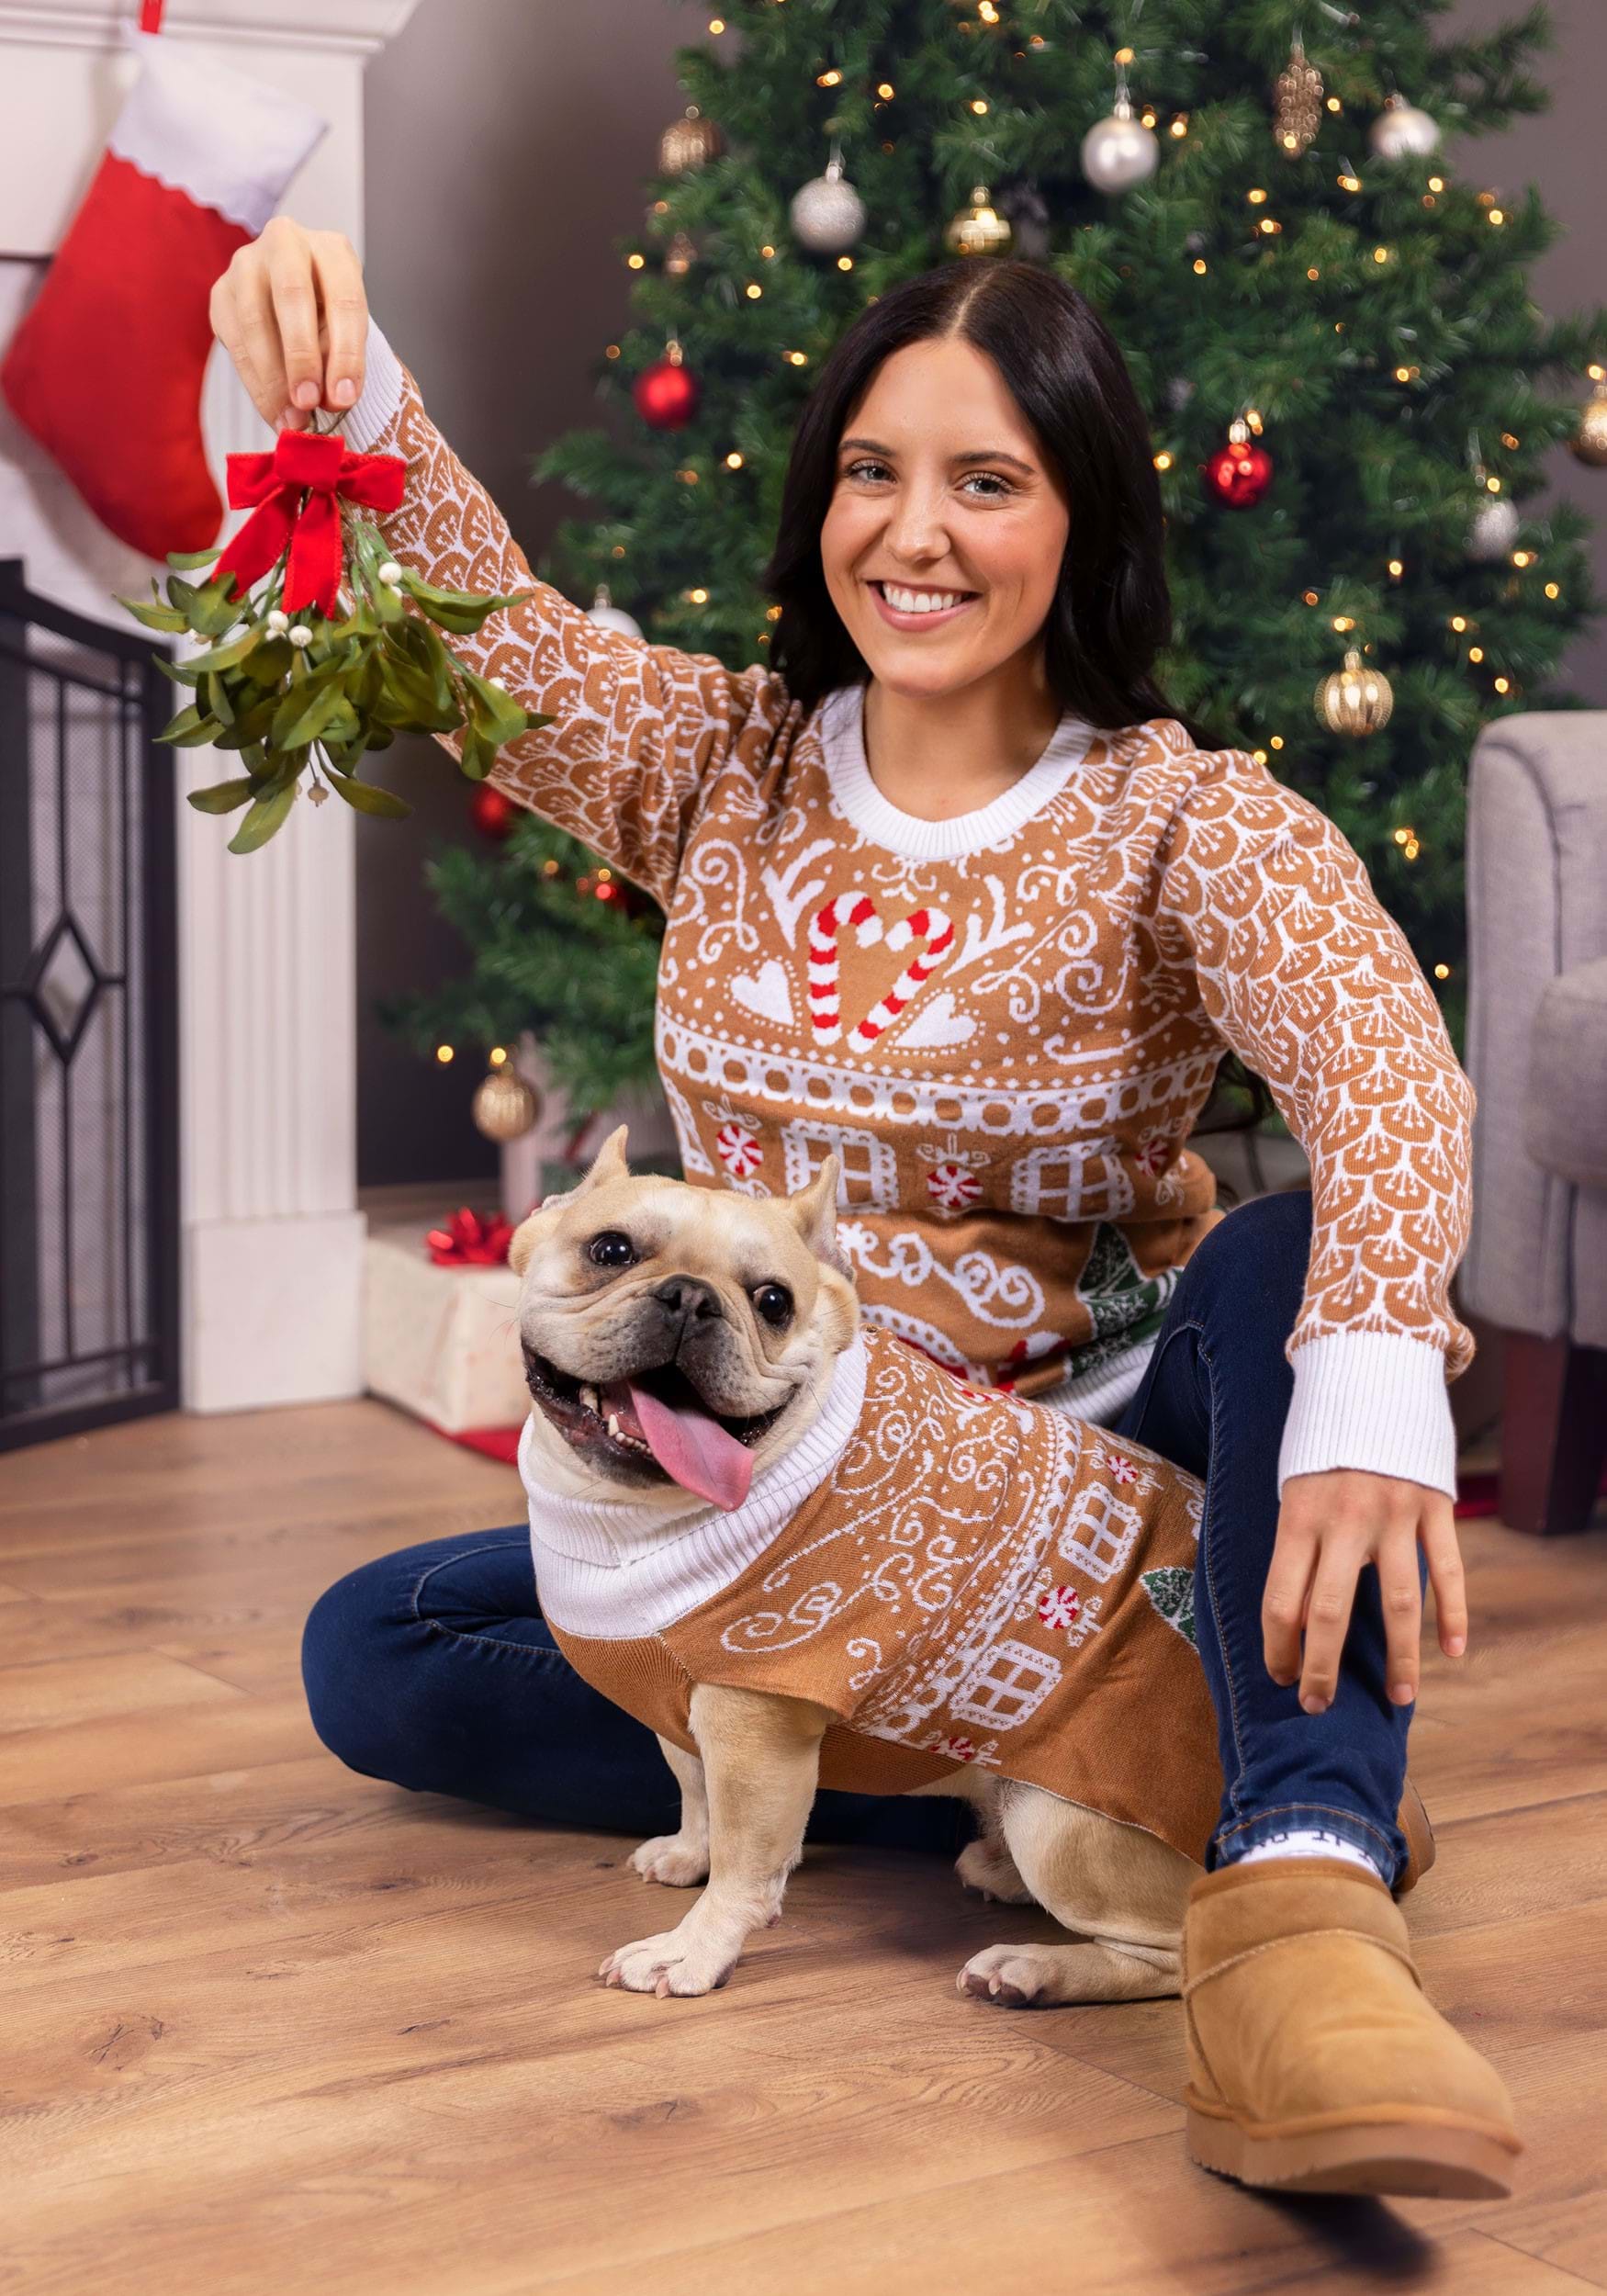 Gingerbread House Ugly Christmas Sweater For Women